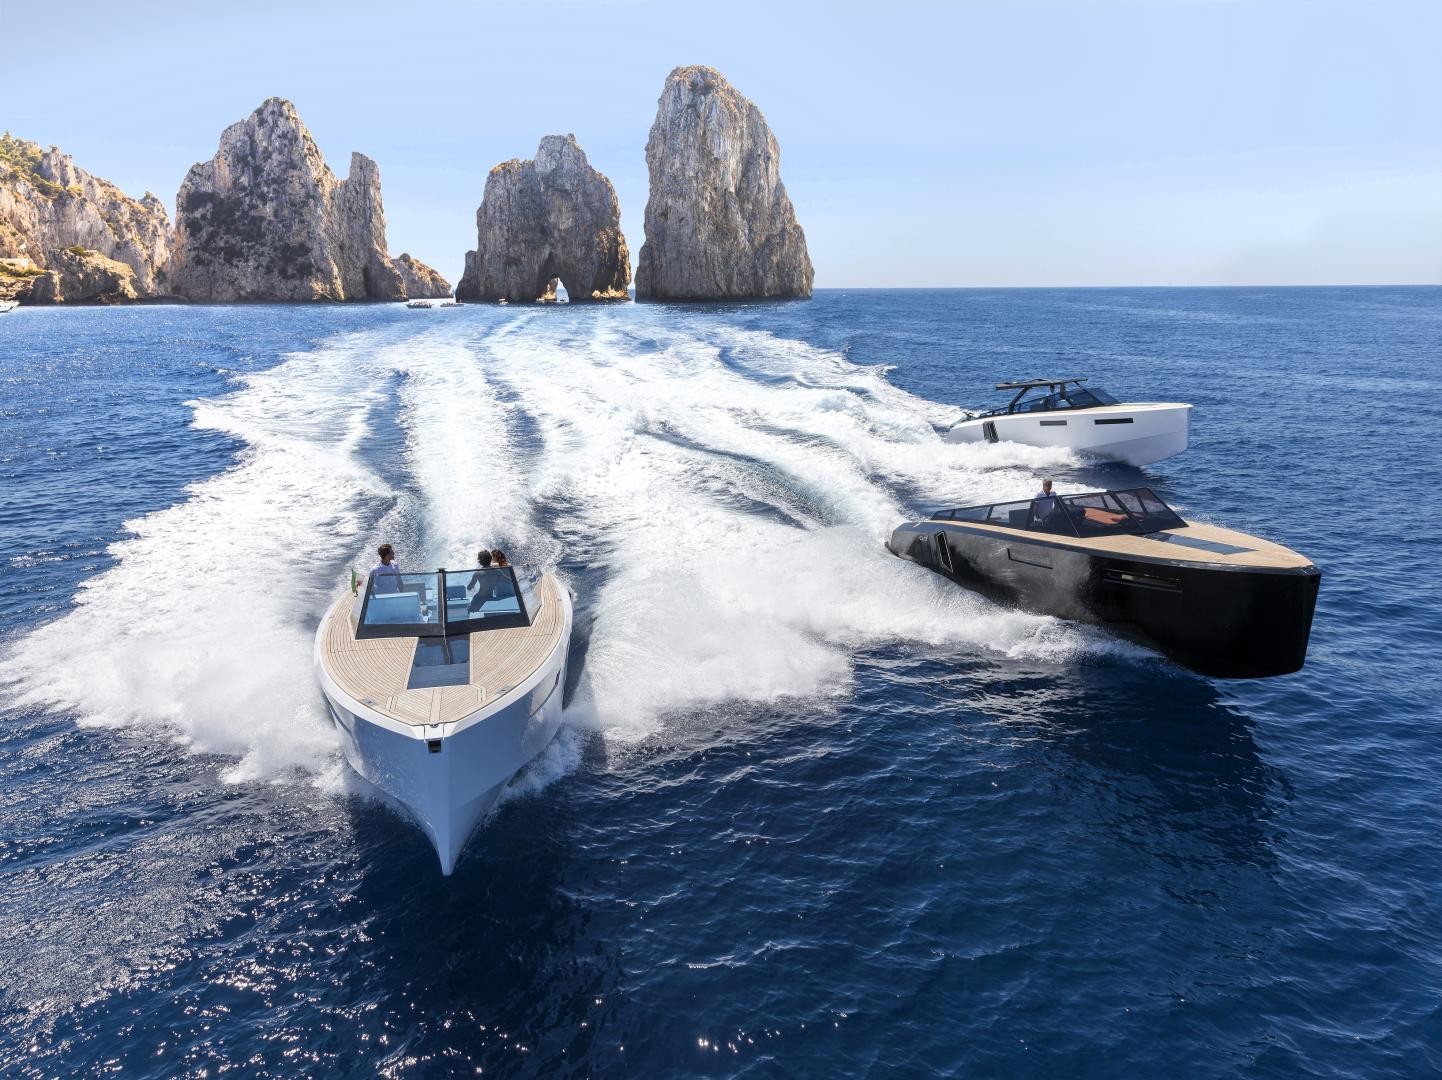 Evo Yachts makes its debut at the Croatia Boat Show with Evo 43